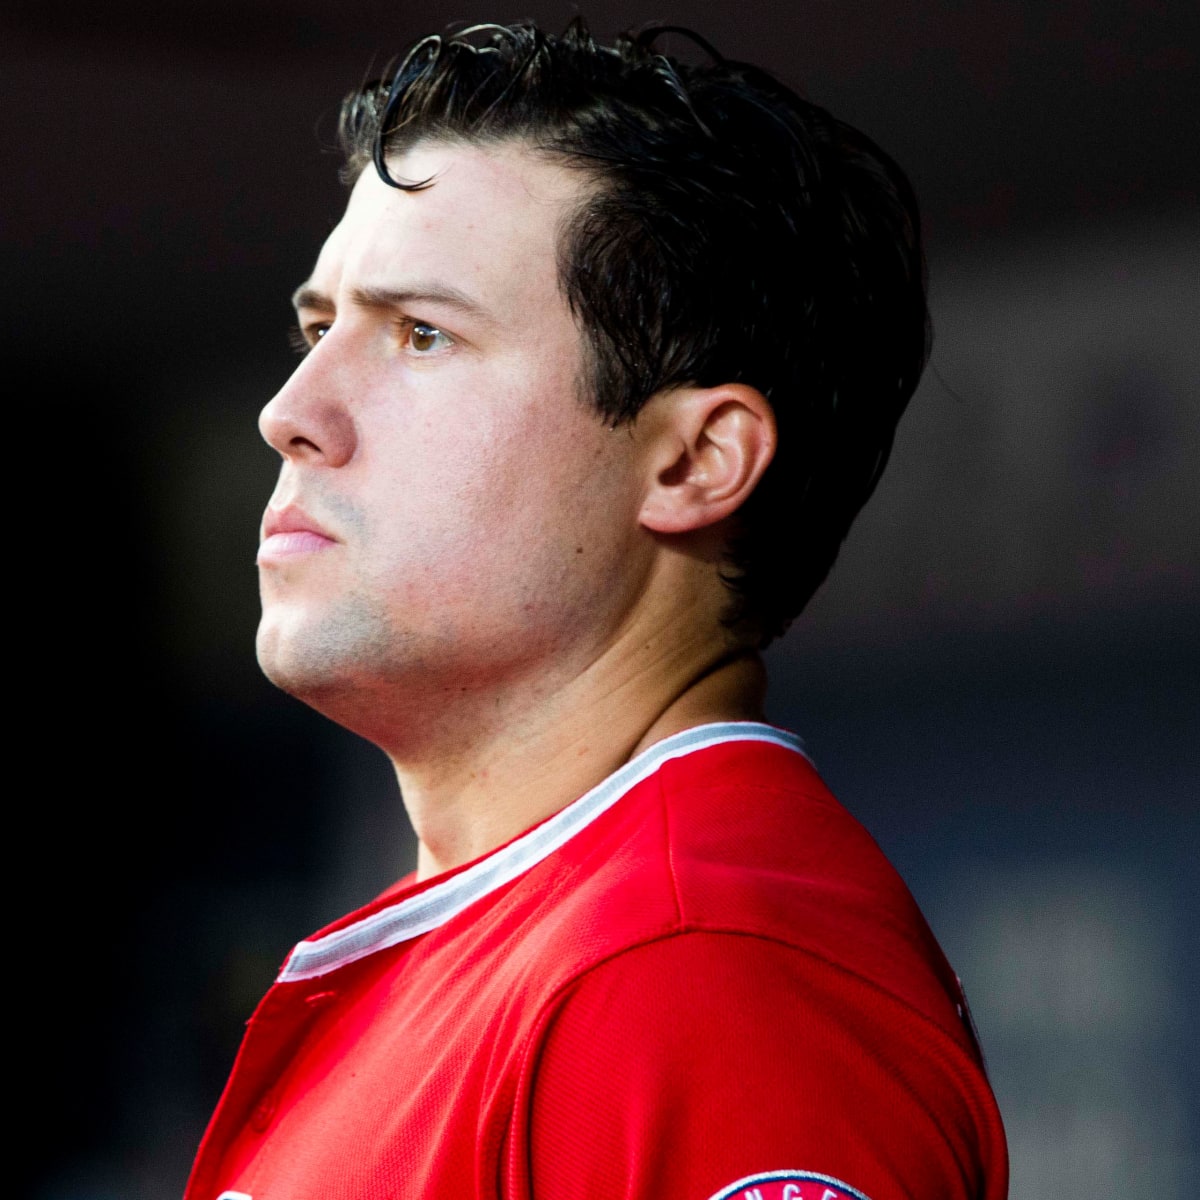 The Angels Prepare for a Legal Fight Over Liability in Tyler Skaggs's Death  - WSJ